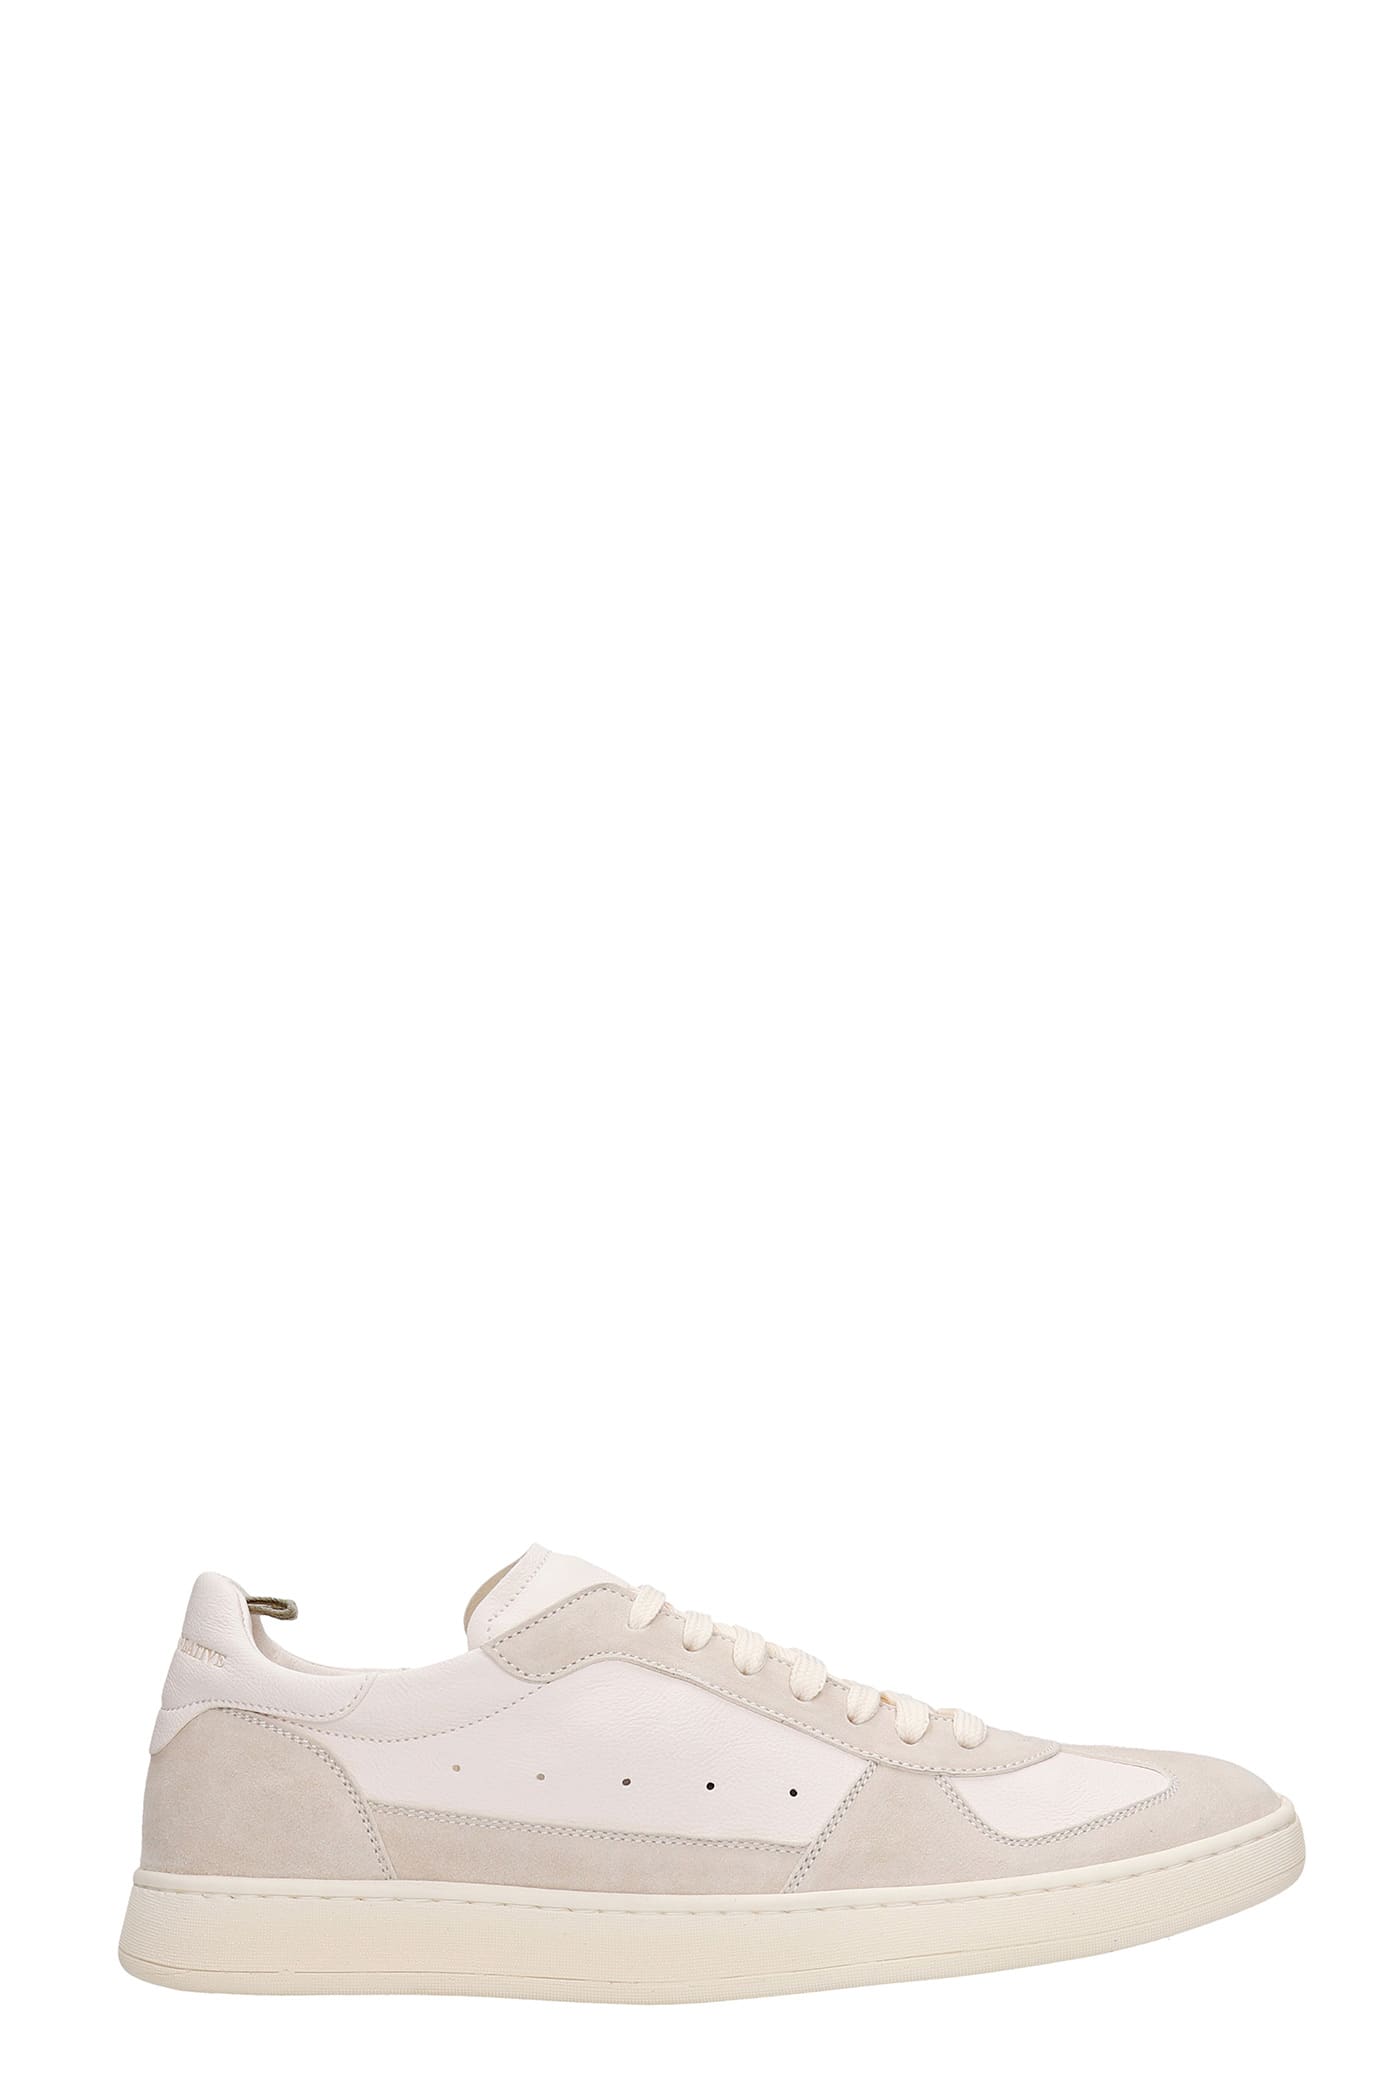 Officine Creative Kadett 001 Sneakers In Rose-pink Suede And Leather